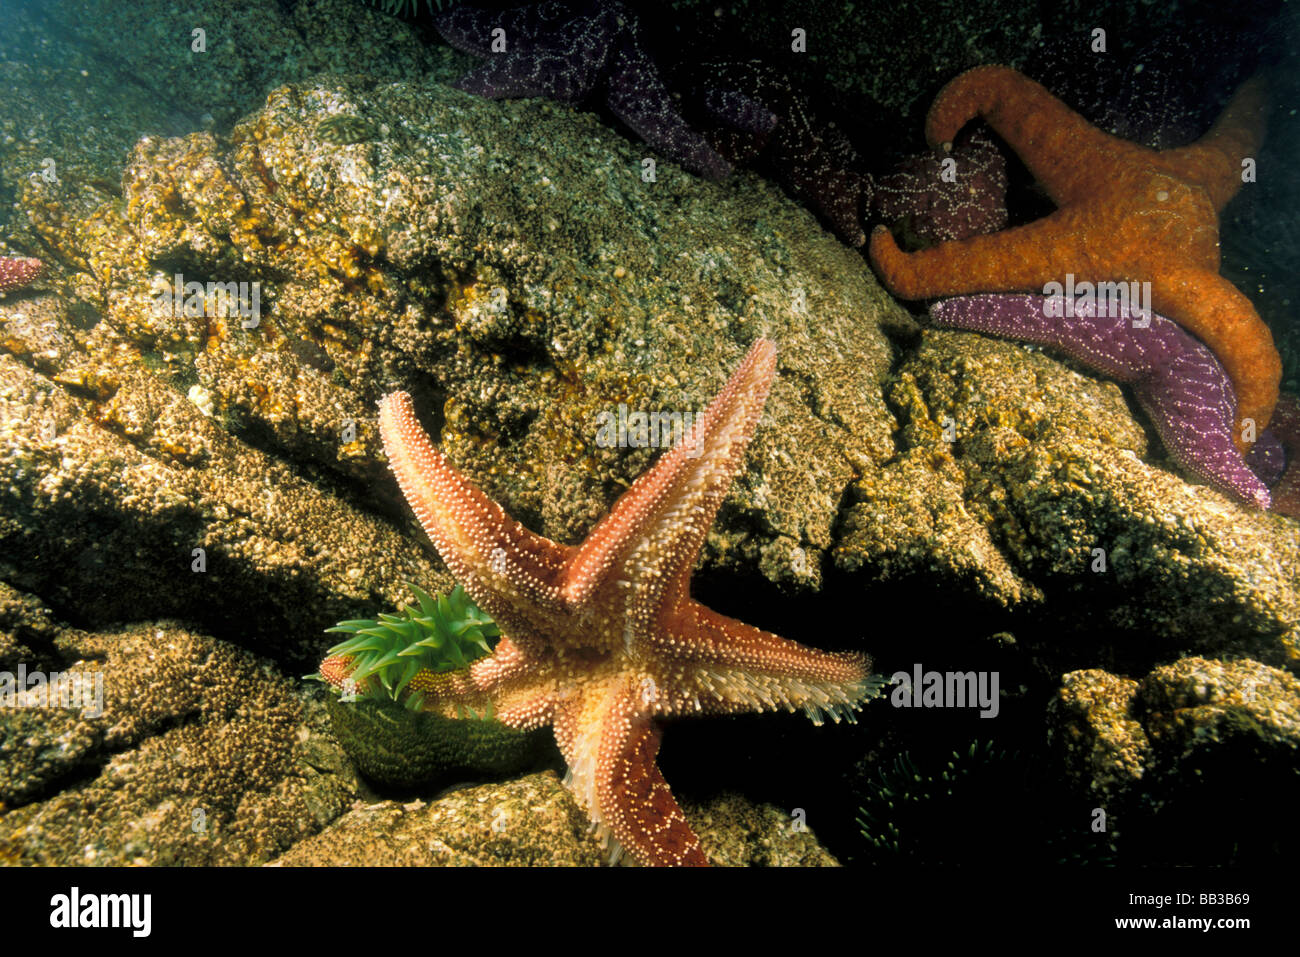 USA, Pacific Northwest. Green anemone with trapped pisaster sea star. Stock Photo